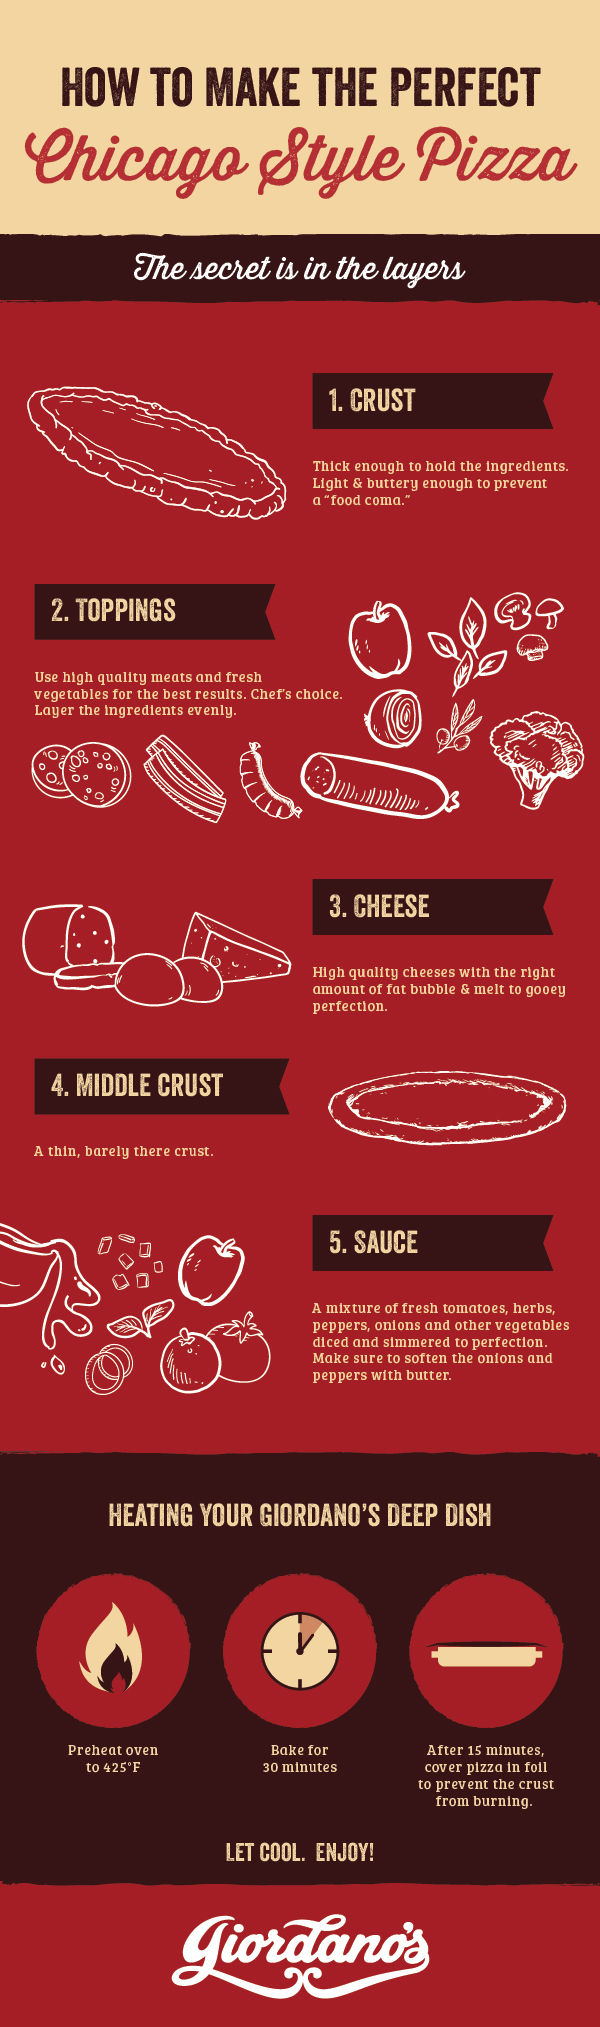 How to make the perfect Chicago Style Pizza